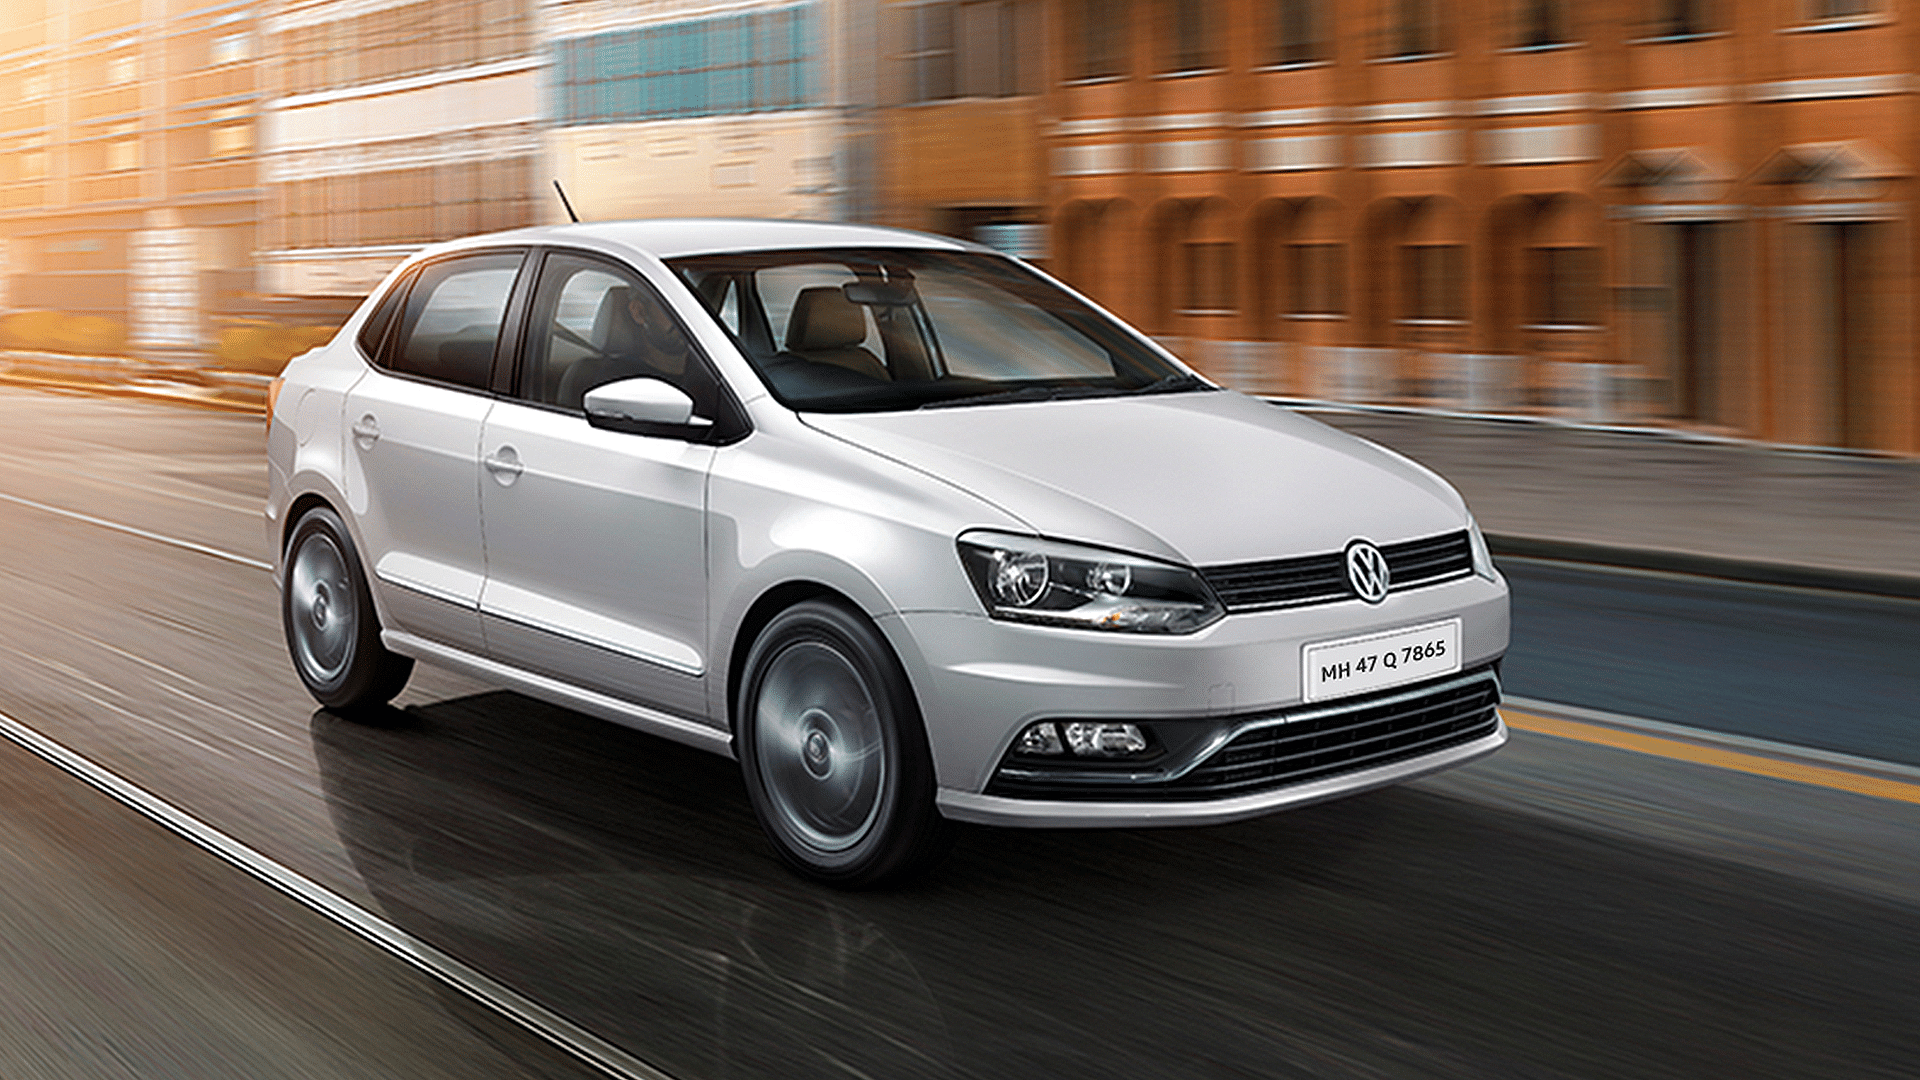 Own a Volkswagen Ameo for the price of a manual.